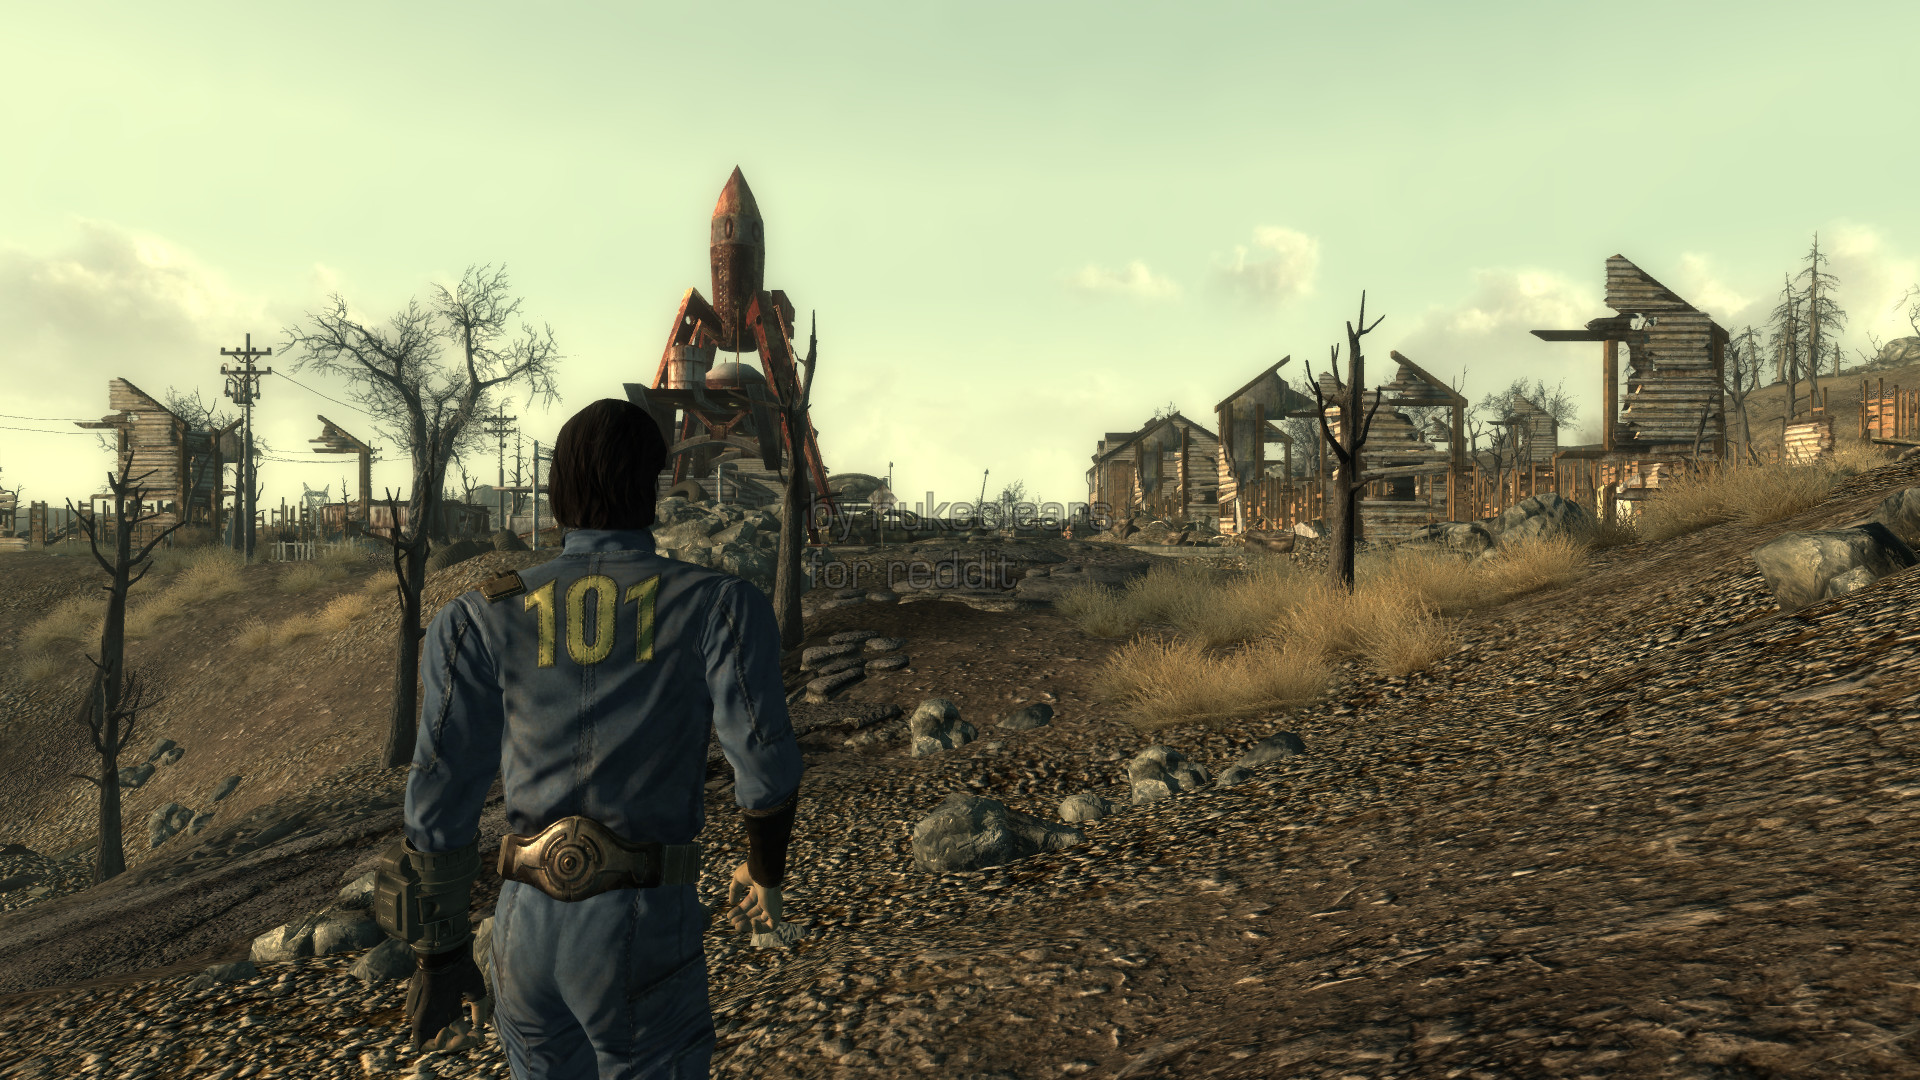 1920x1080 Filename: Fallout-3-Wallpapers-2.png